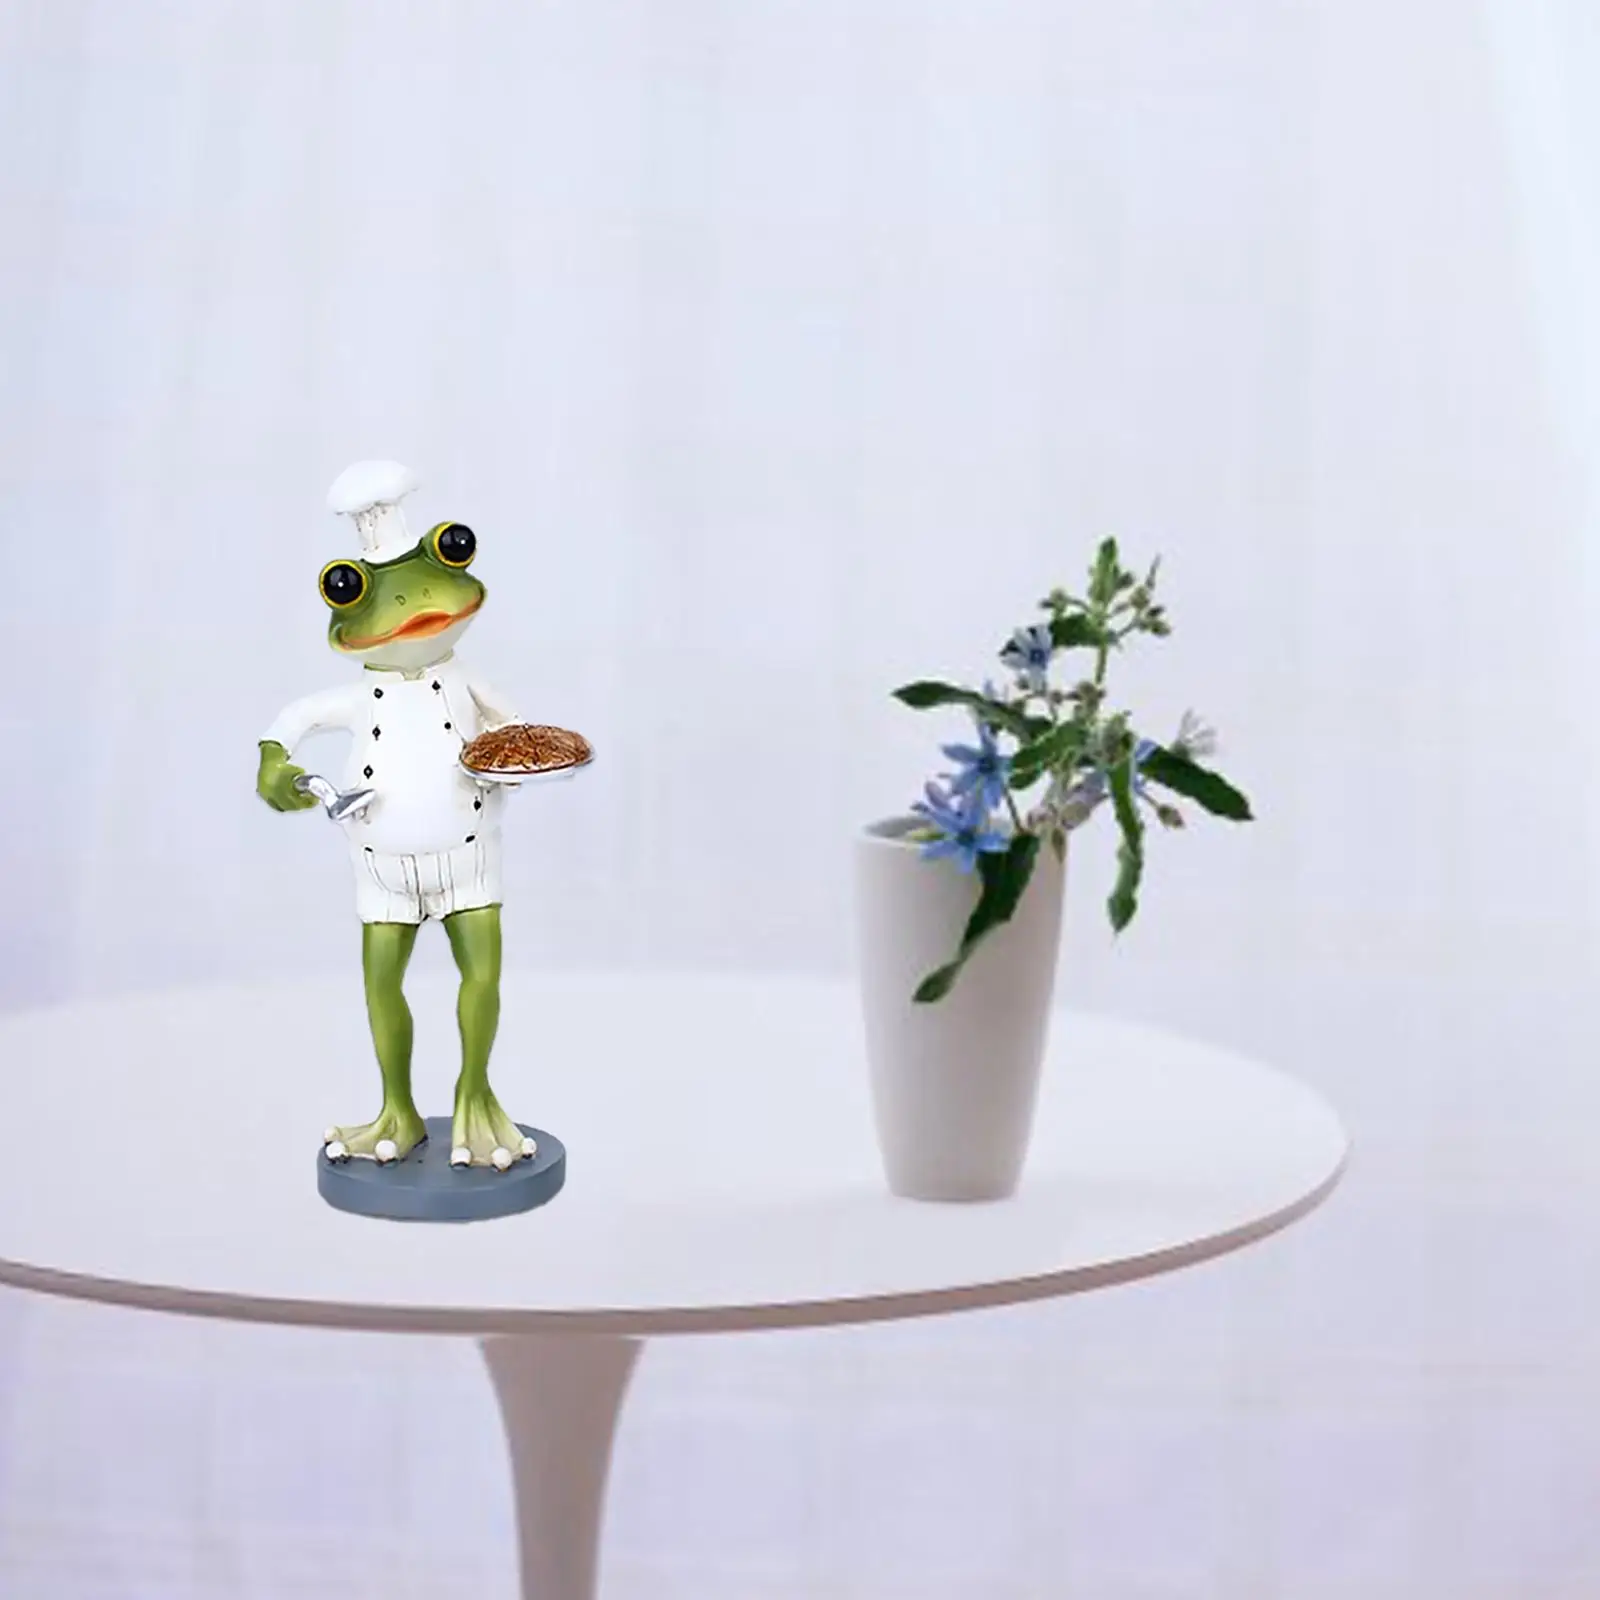  Figurine Frog Statue Furnishing Articles for Home Decorative